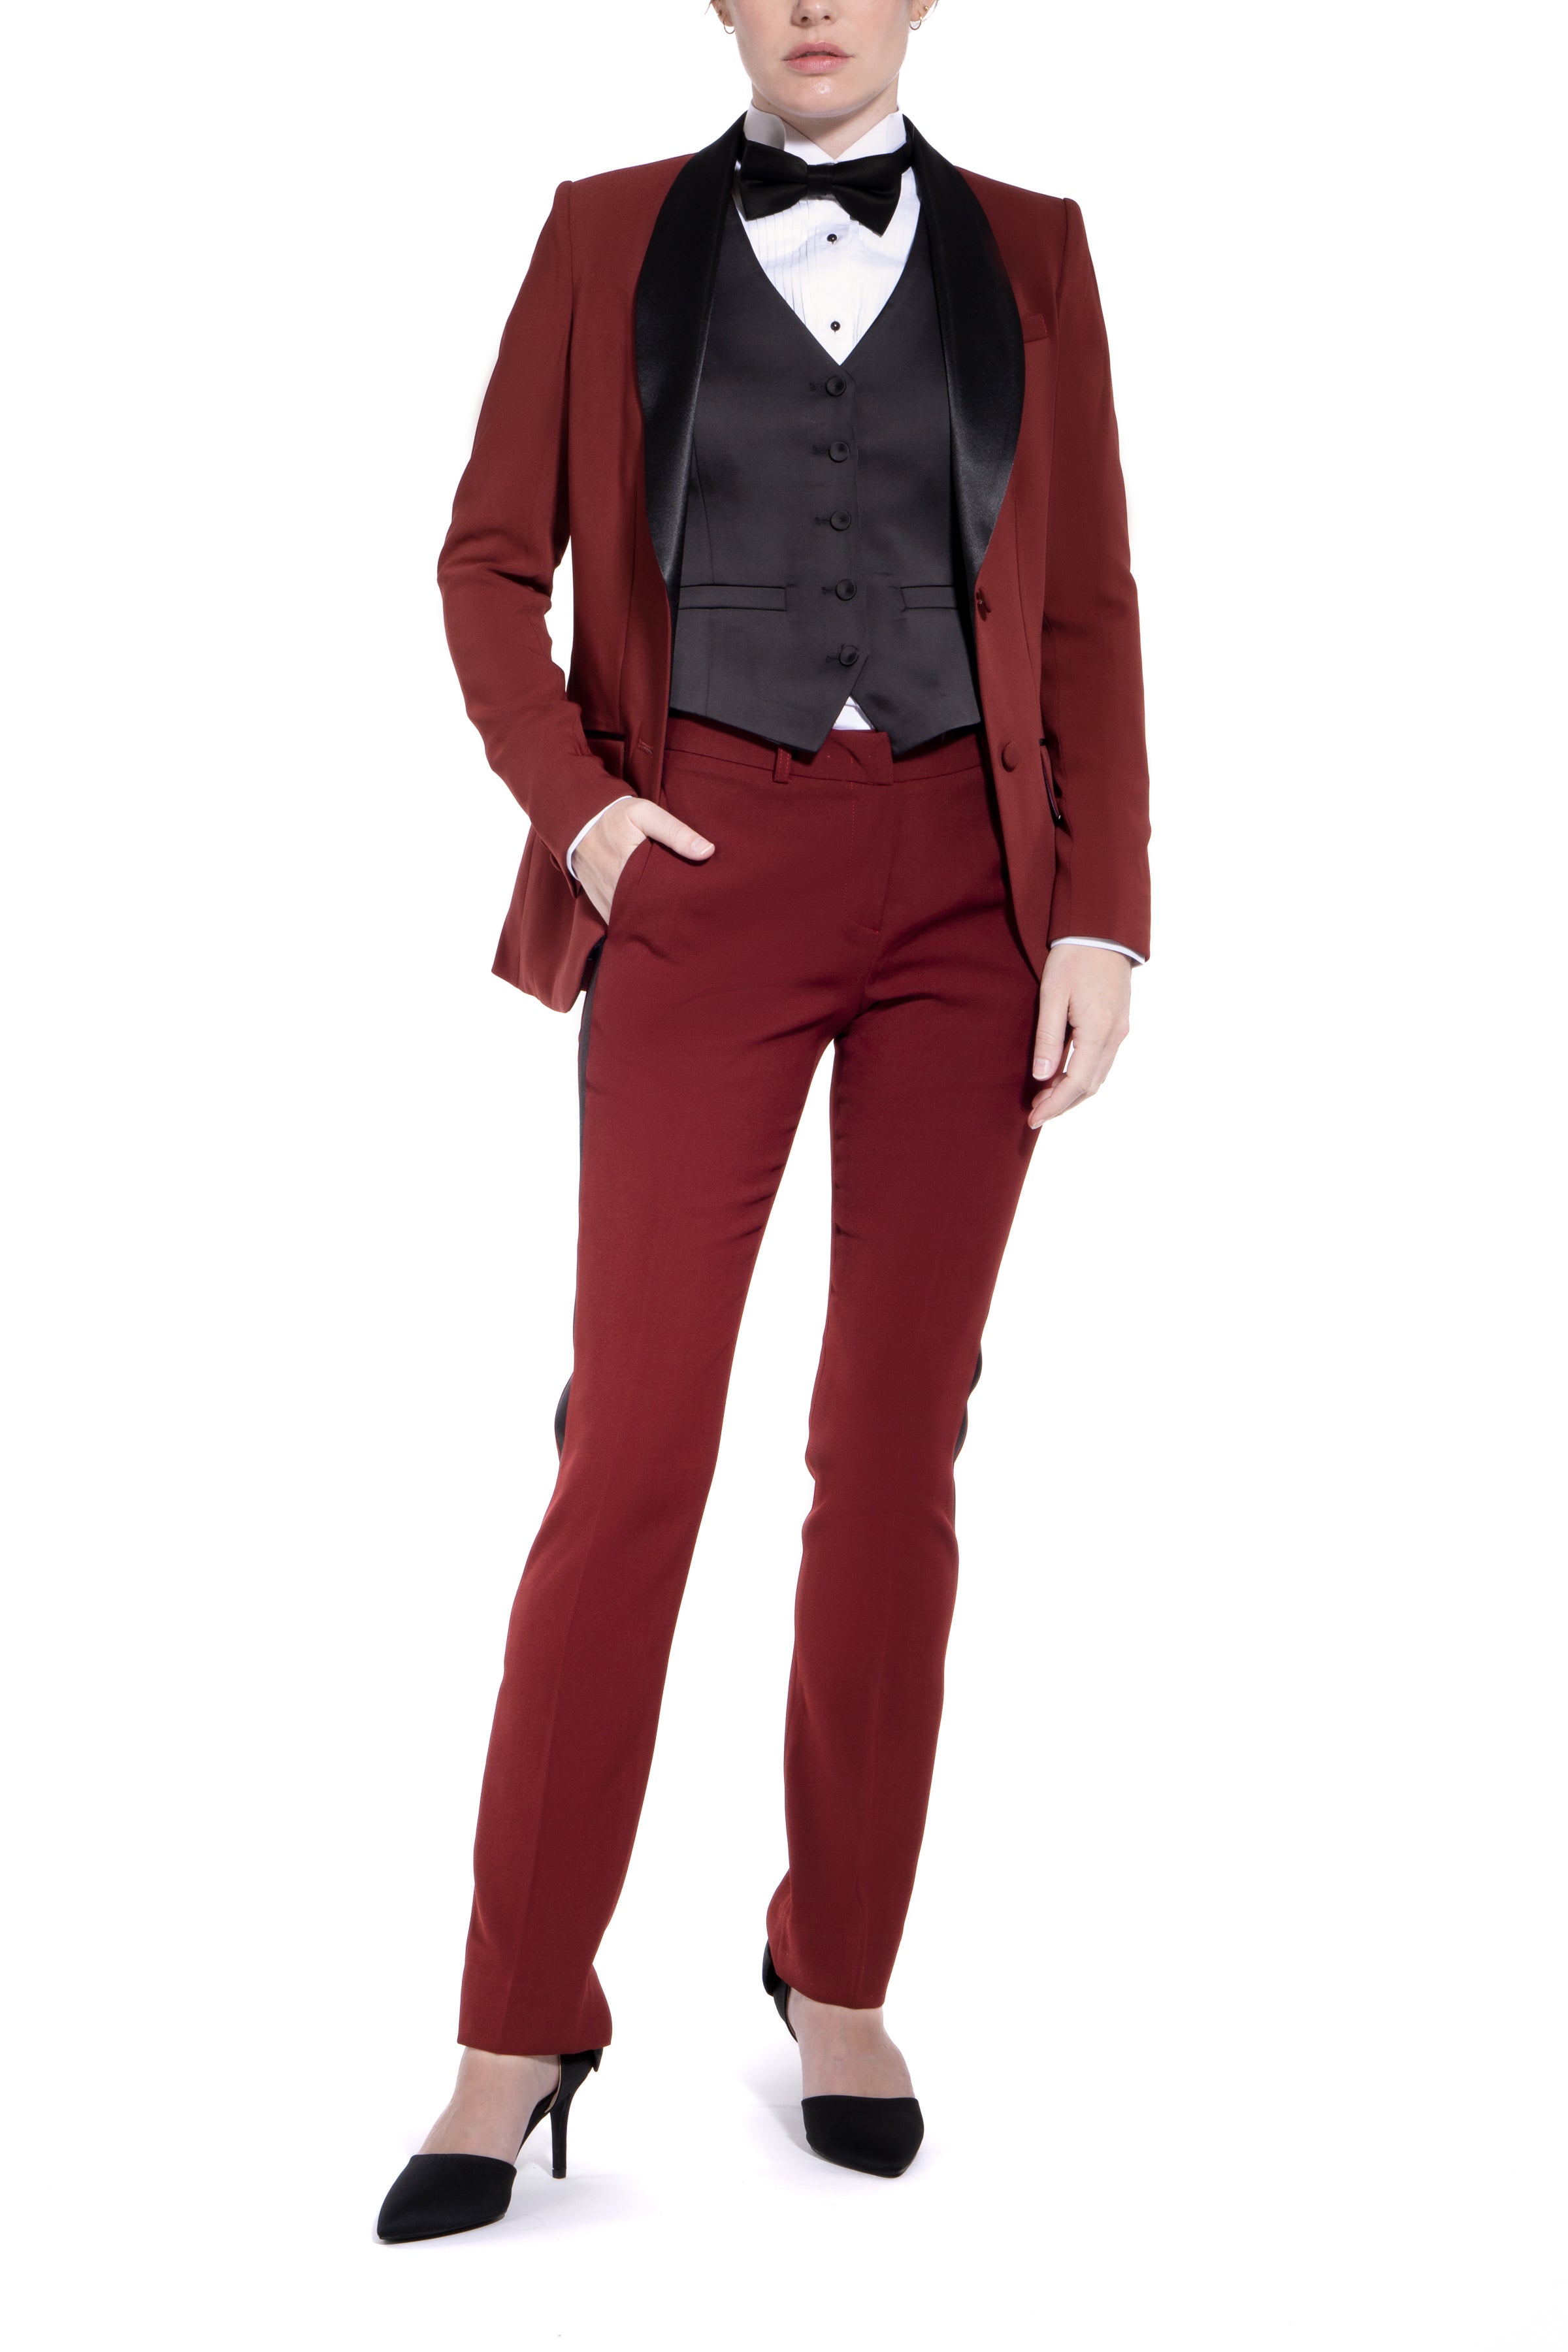 Man in Maroon Suit Jacket and Black Pants  Free Stock Photo